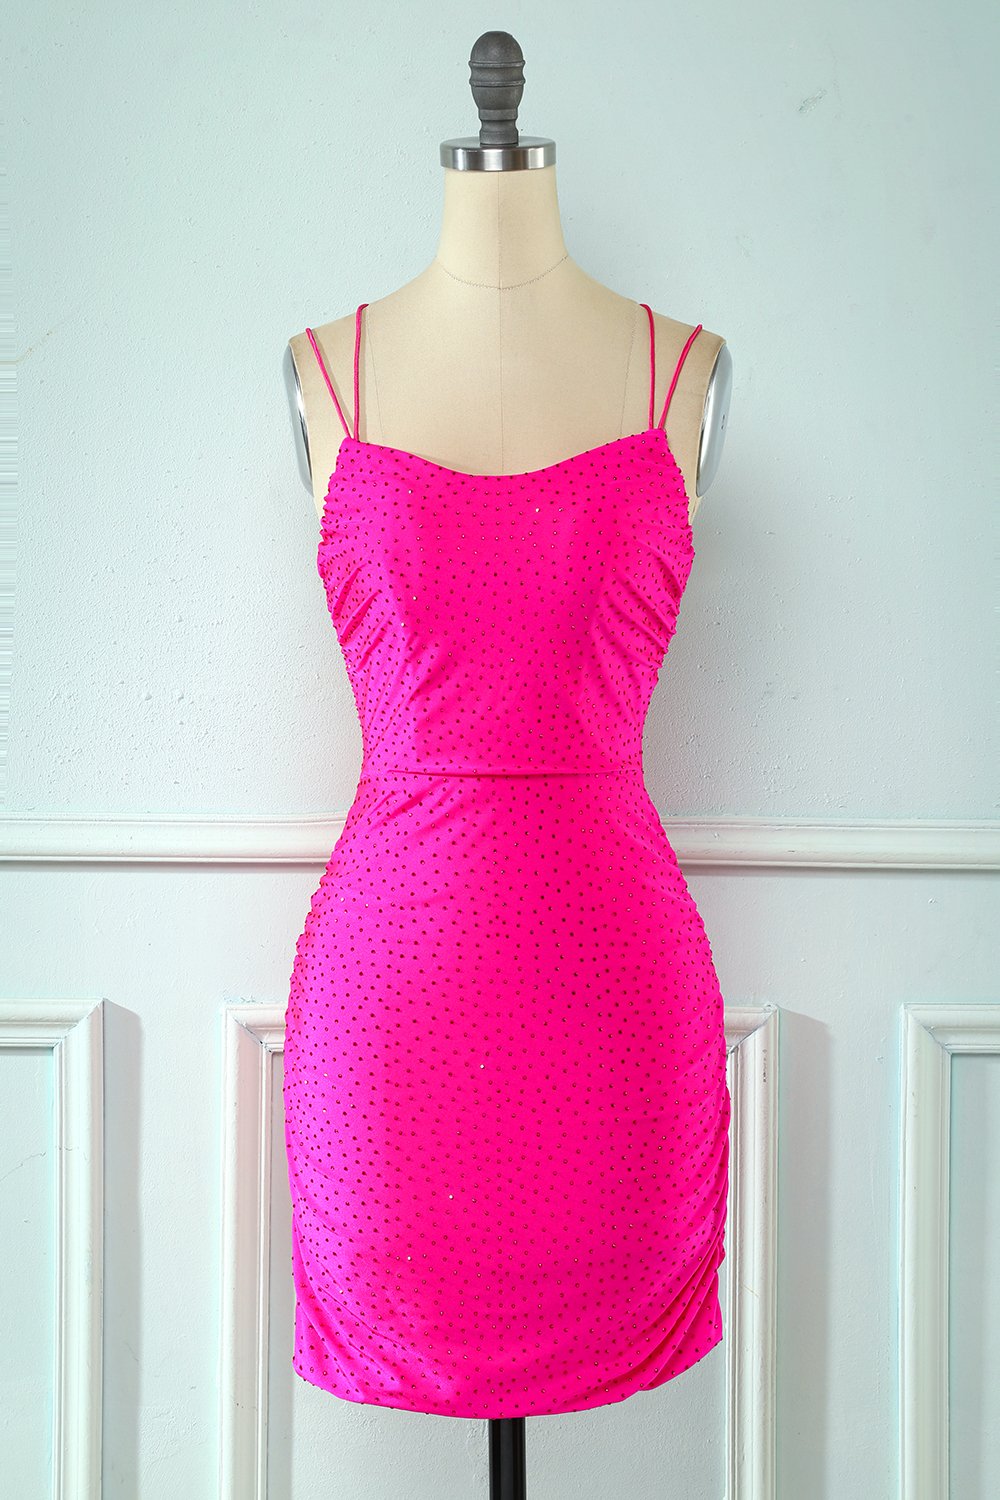 Rose Pink Tight Party Dress